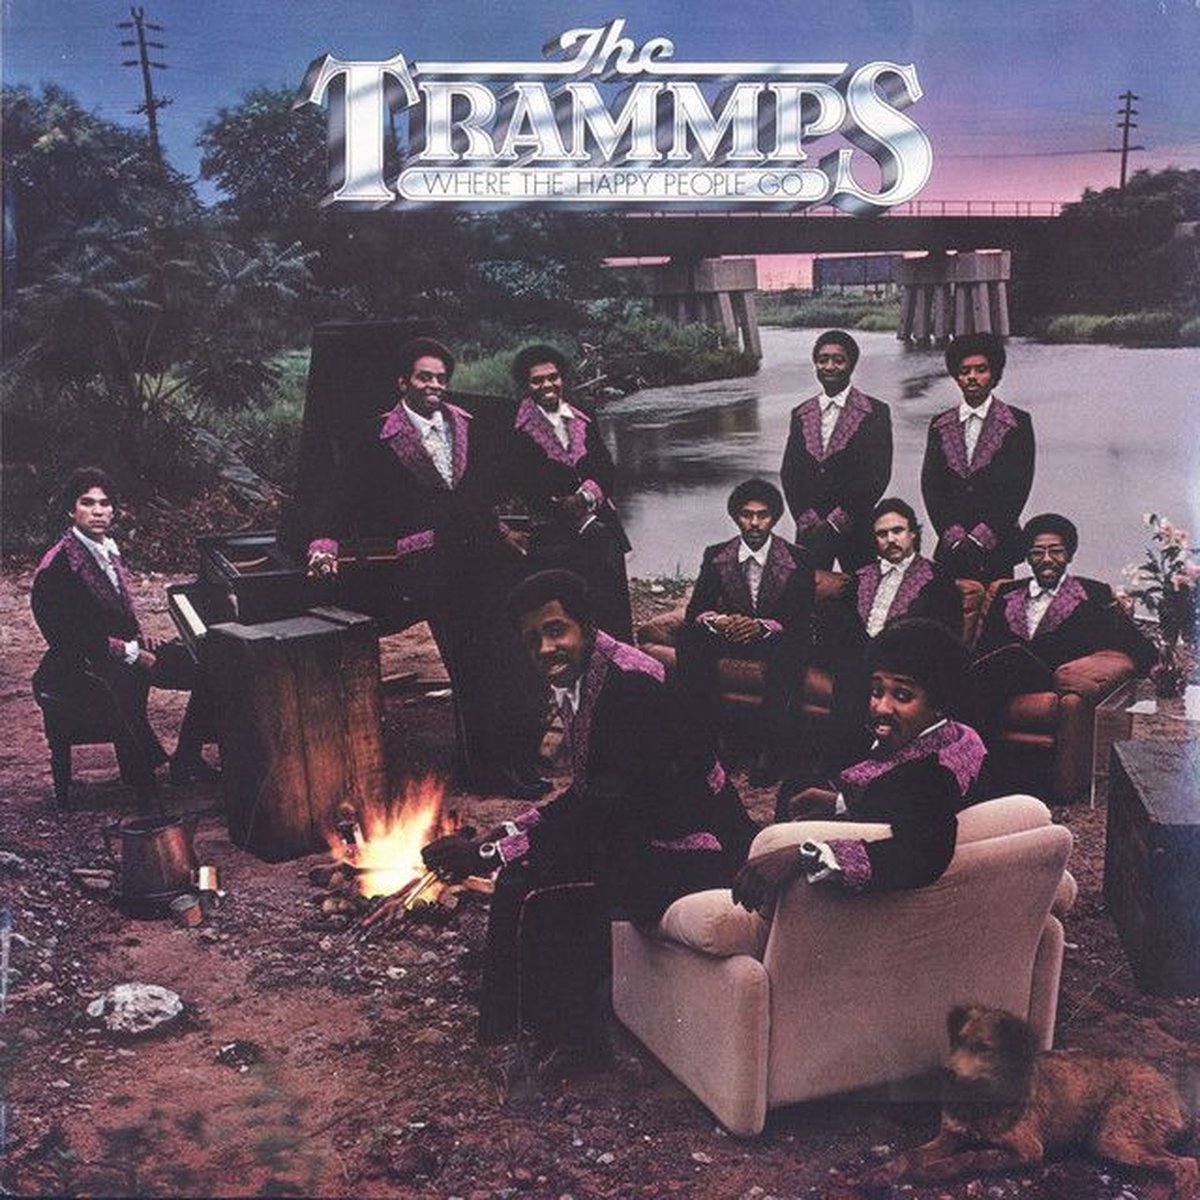 The Trammps - Where the Happy People Go (1976) LP - The Trammps